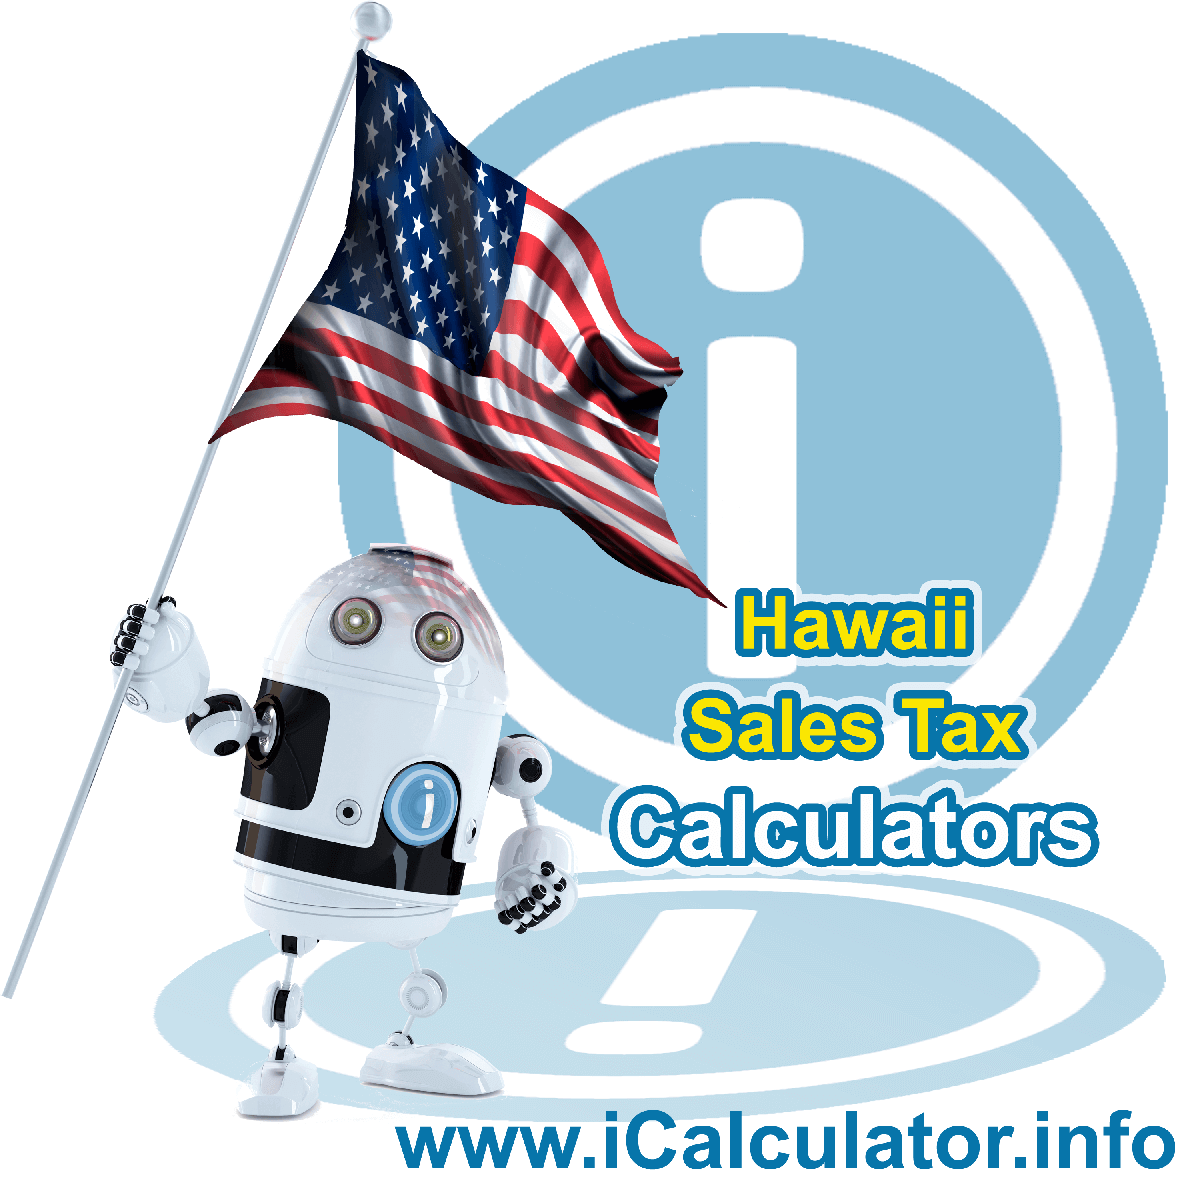 Hilo Sales Rates: This image illustrates a calculator robot calculating Hilo sales tax manually using the Hilo Sales Tax Formula. You can use this information to calculate Hilo Sales Tax manually or use the Hilo Sales Tax Calculator to calculate sales tax online.